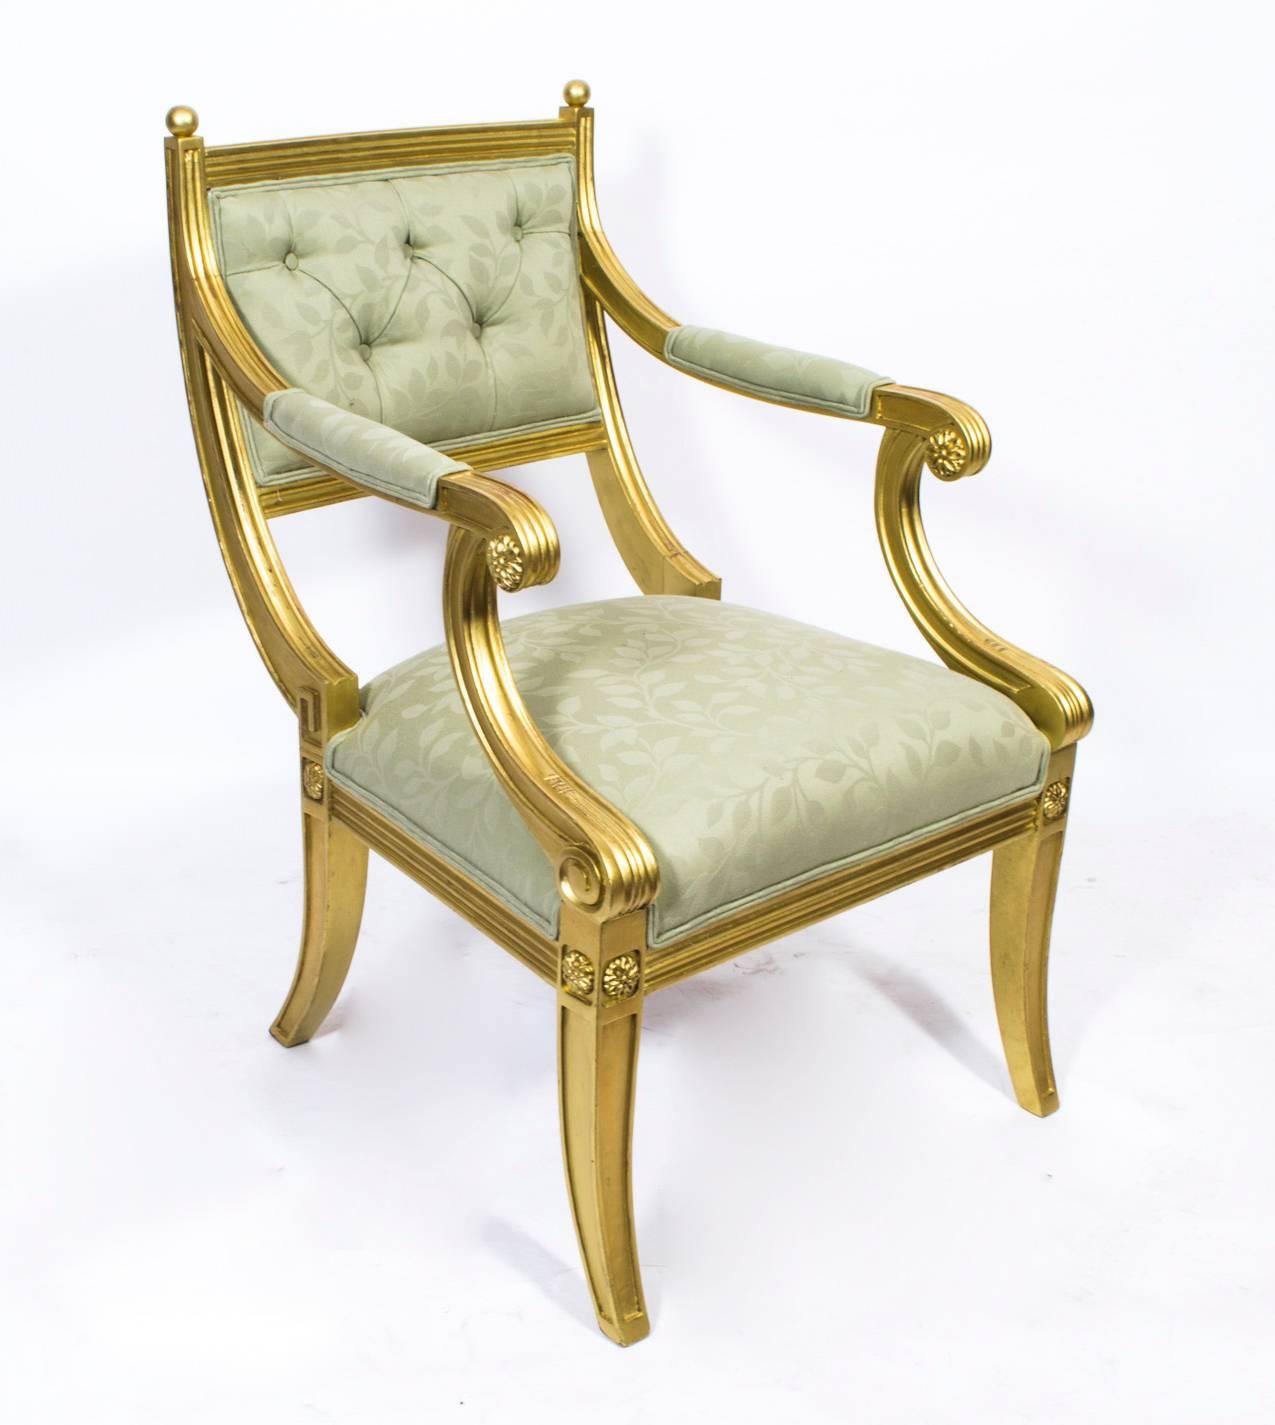 Early 20th Century Regency Style Giltwood Armchair For Sale 4